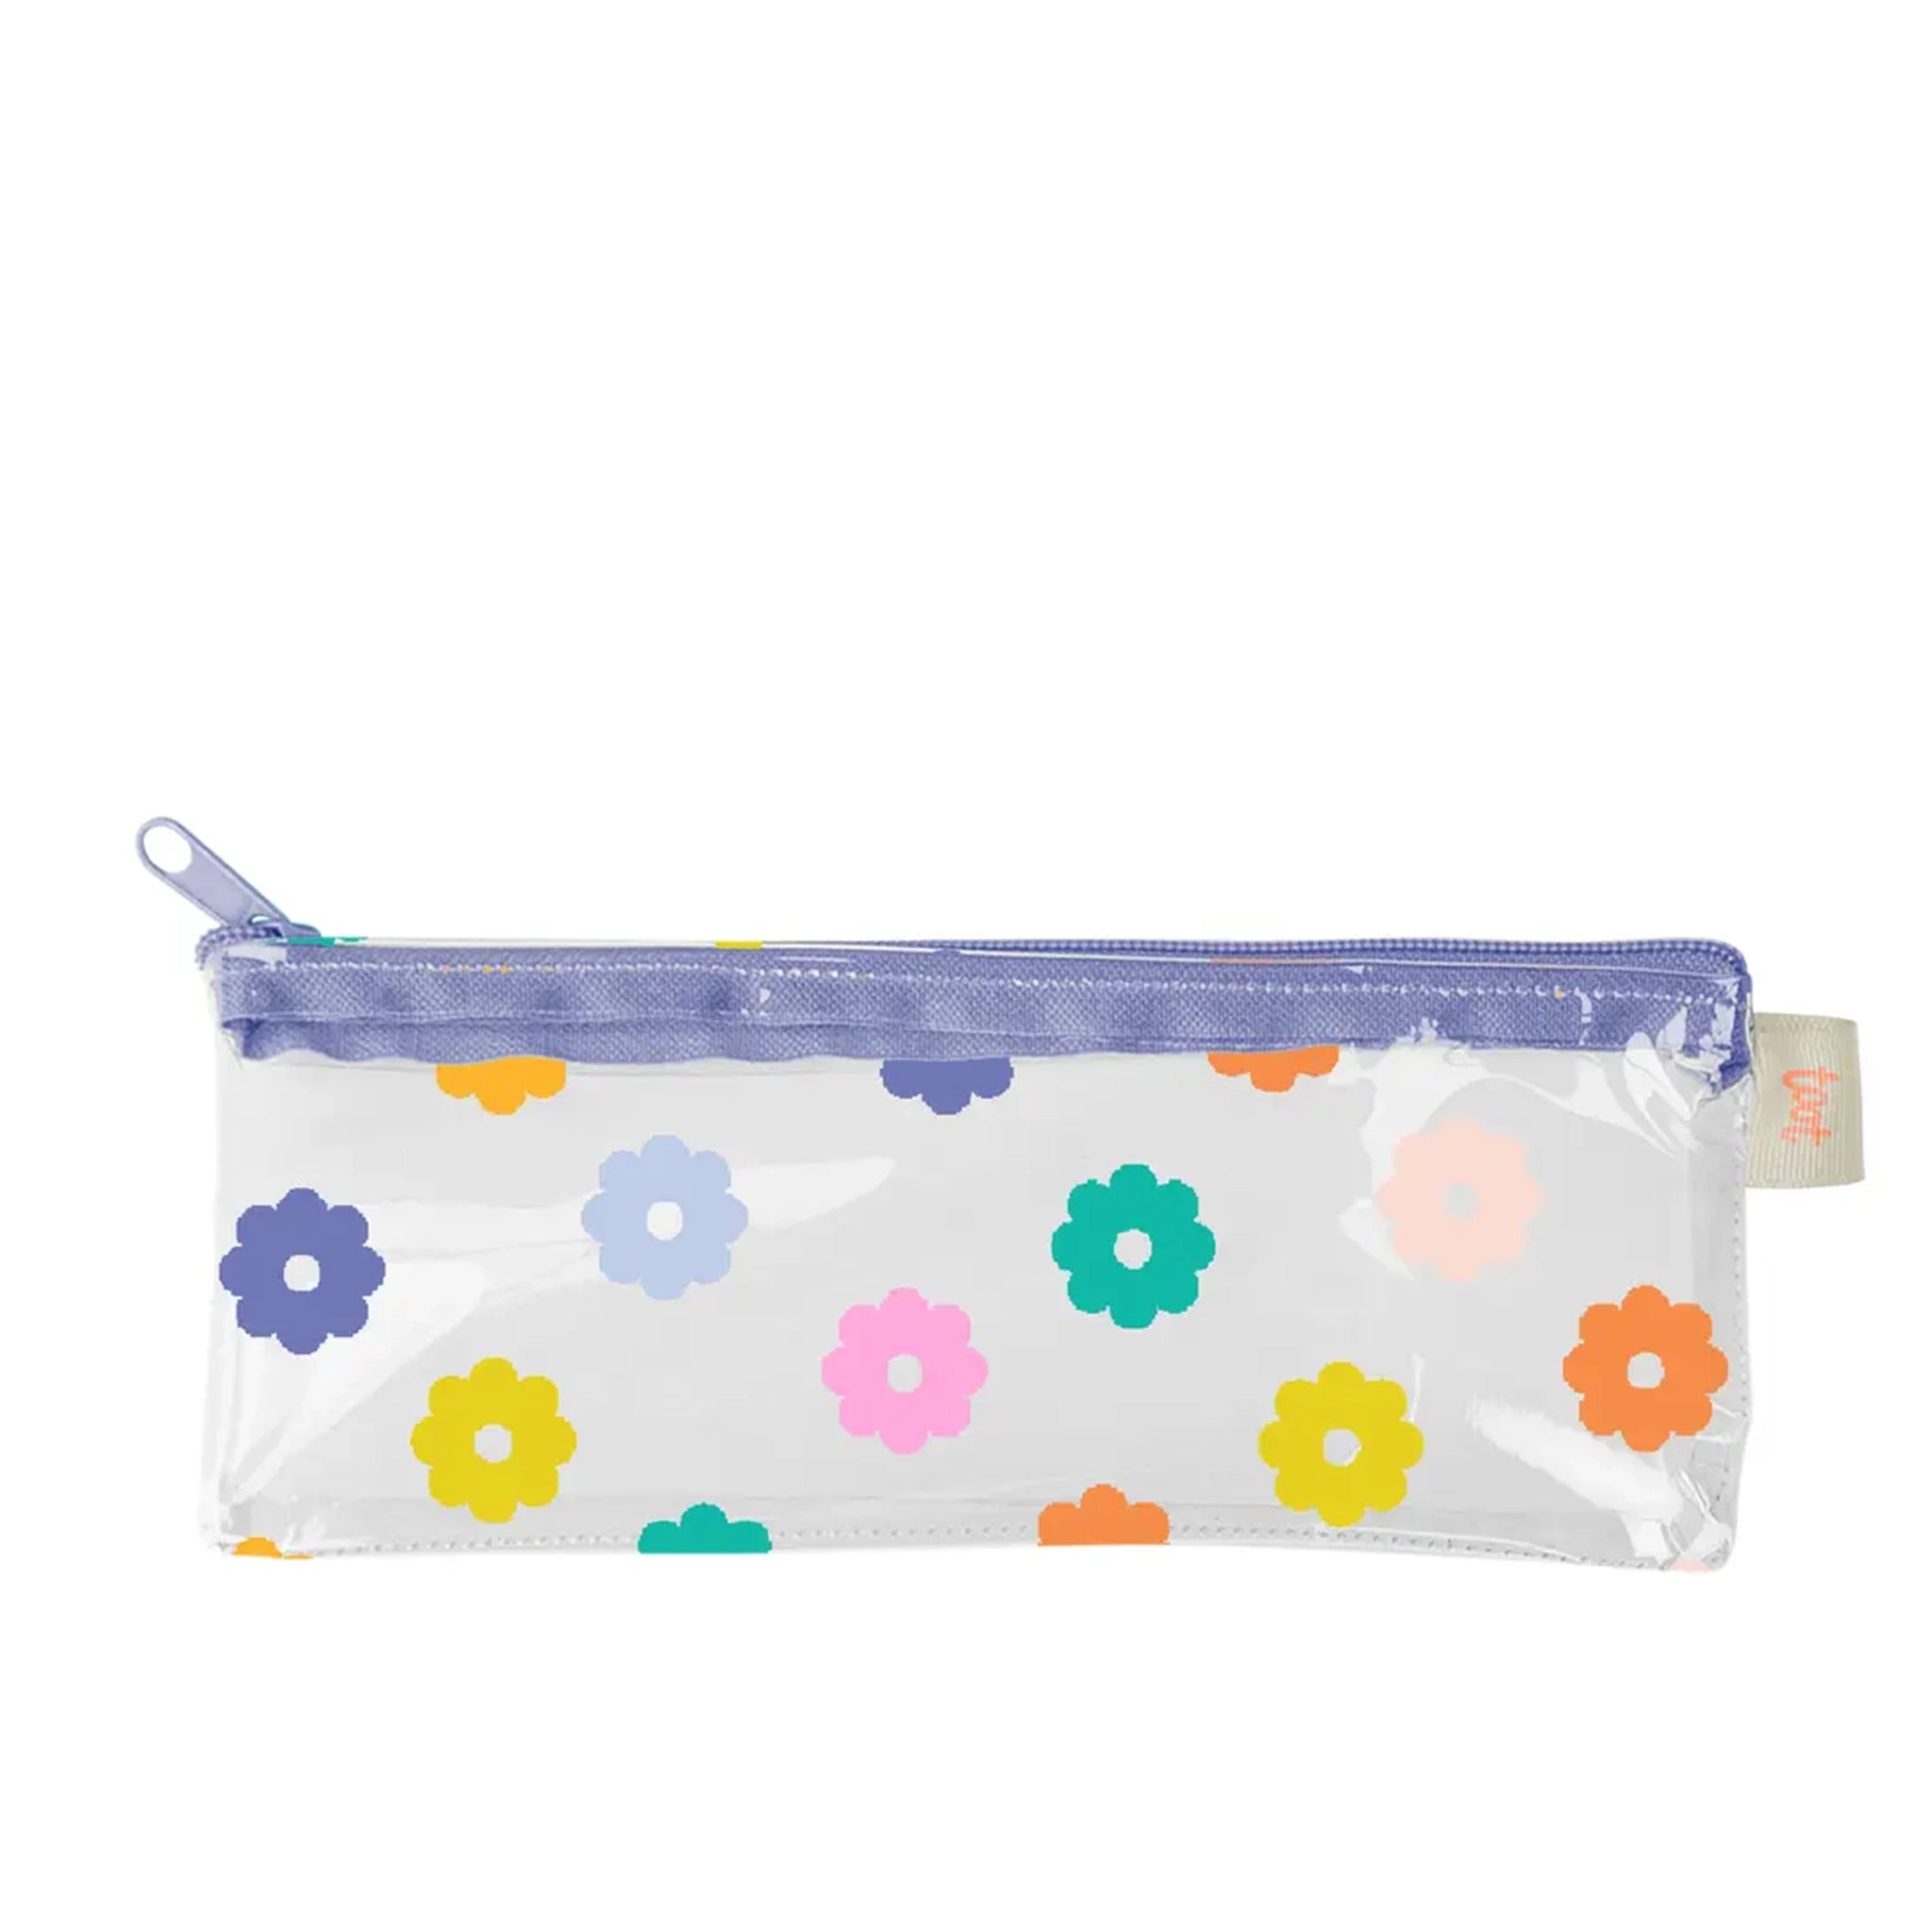 A clear plastic pencil pouch with a zipper closure and a multi-colored daisy print. 